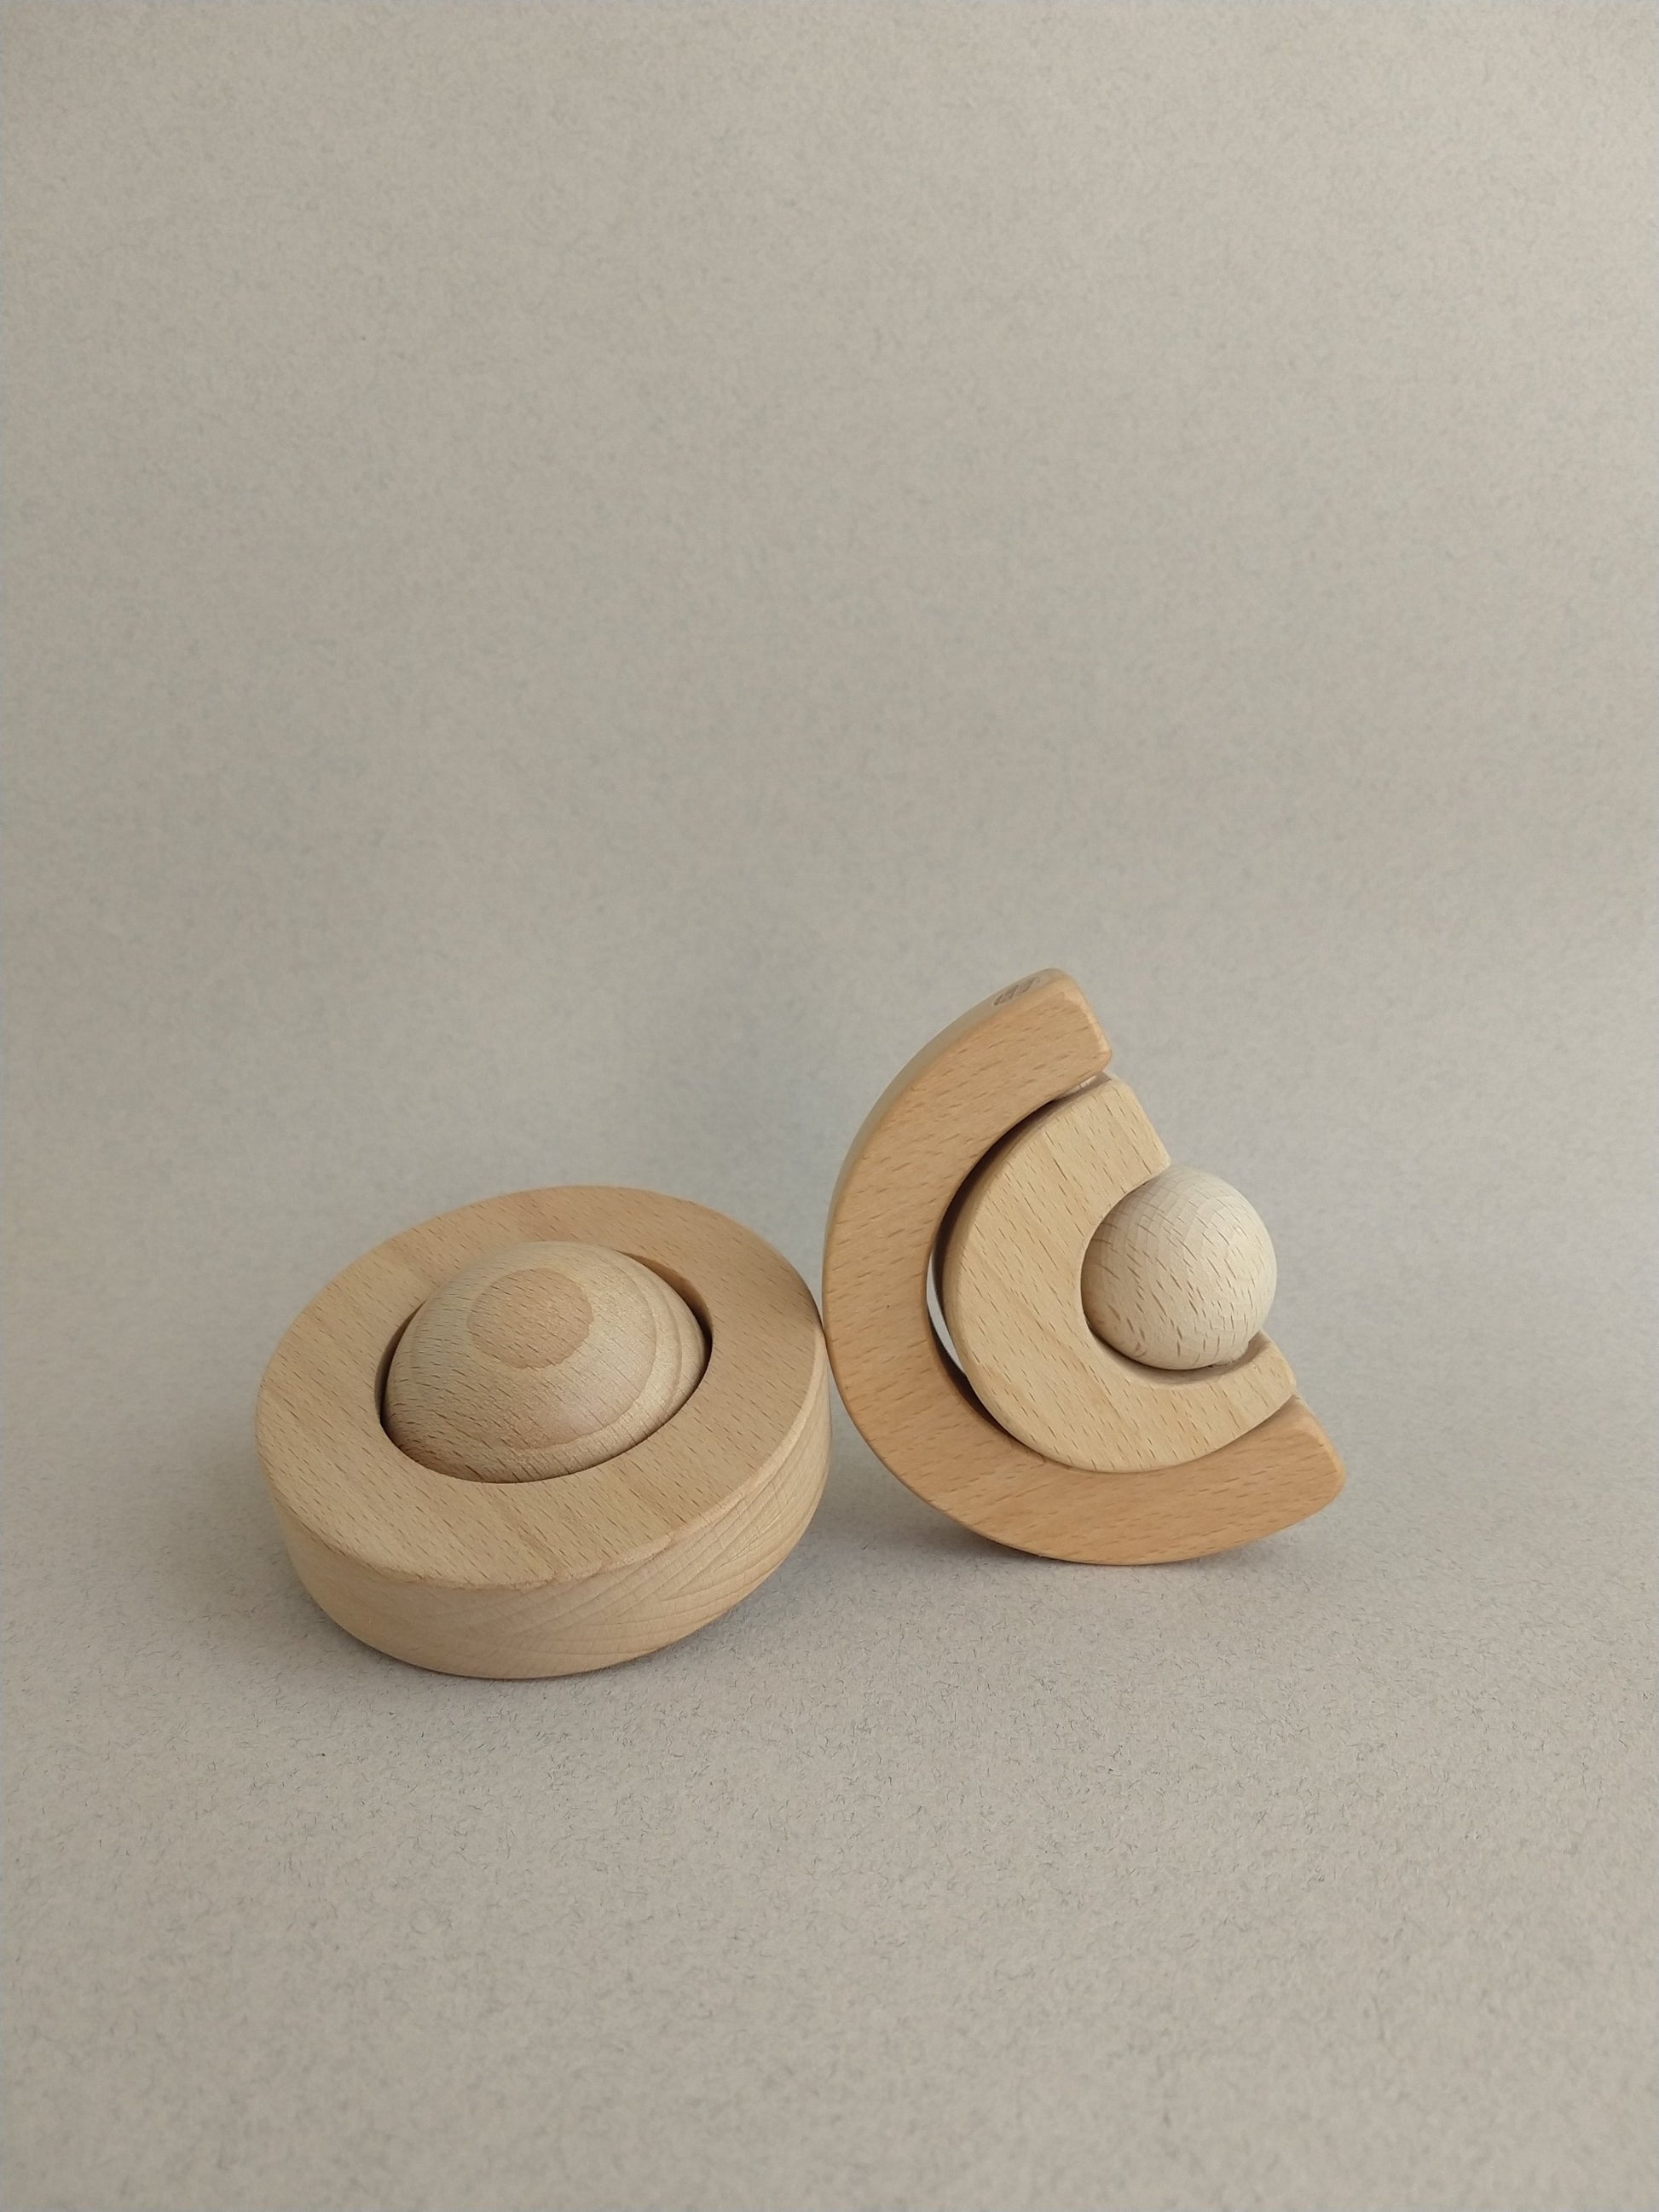 A minimal yet playful wooden teether for babies.